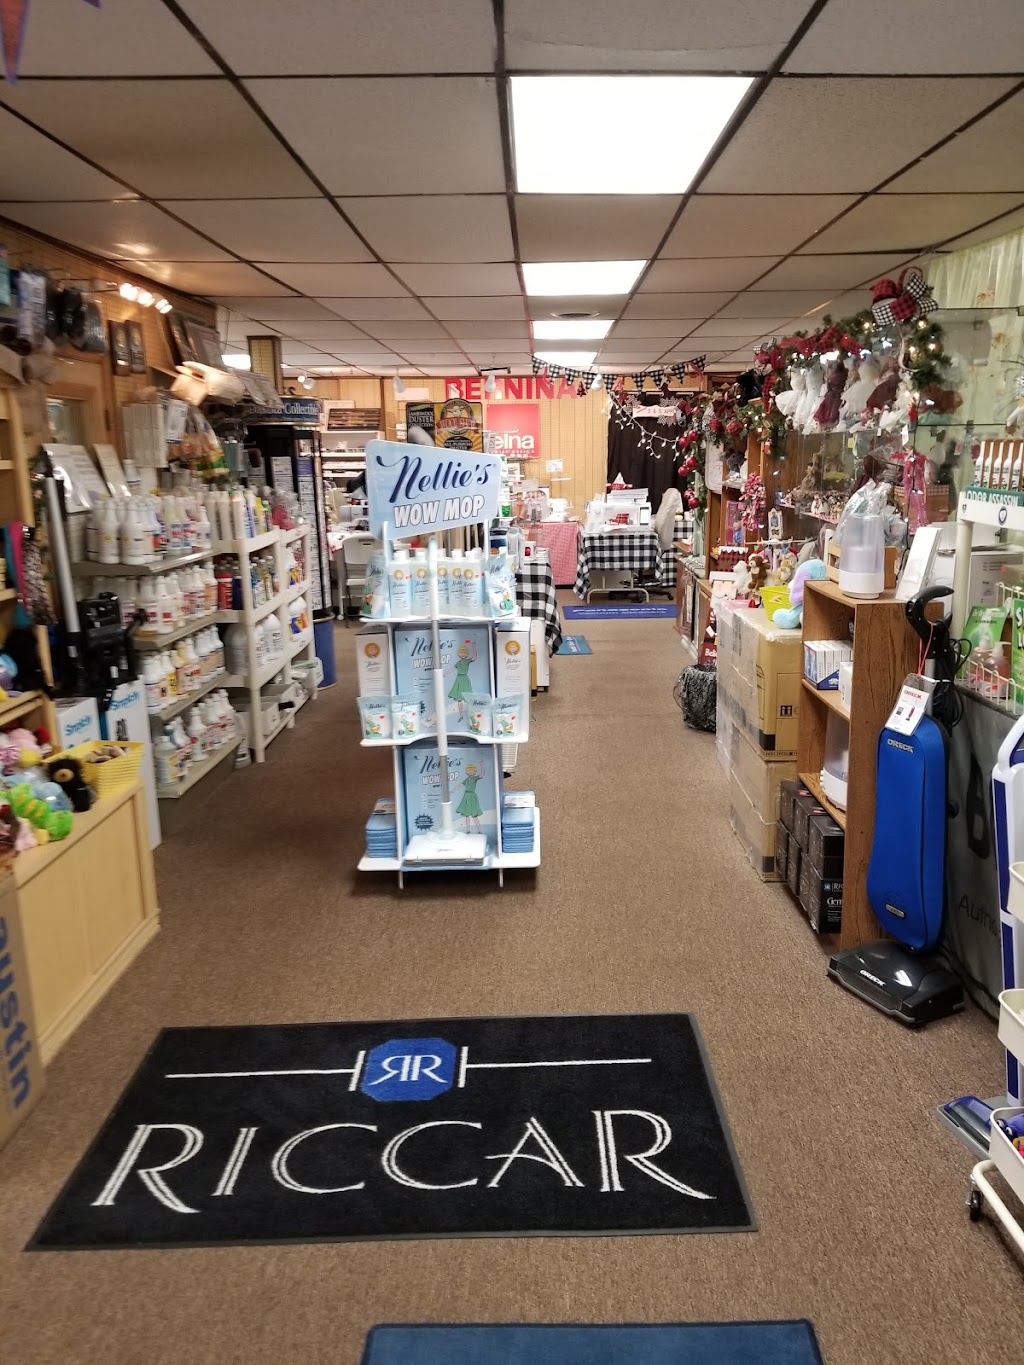 S&S Vac,Appliance & Sewing Center | 420 Violet Ave, Poughkeepsie, NY 12601 | Phone: (845) 452-6122